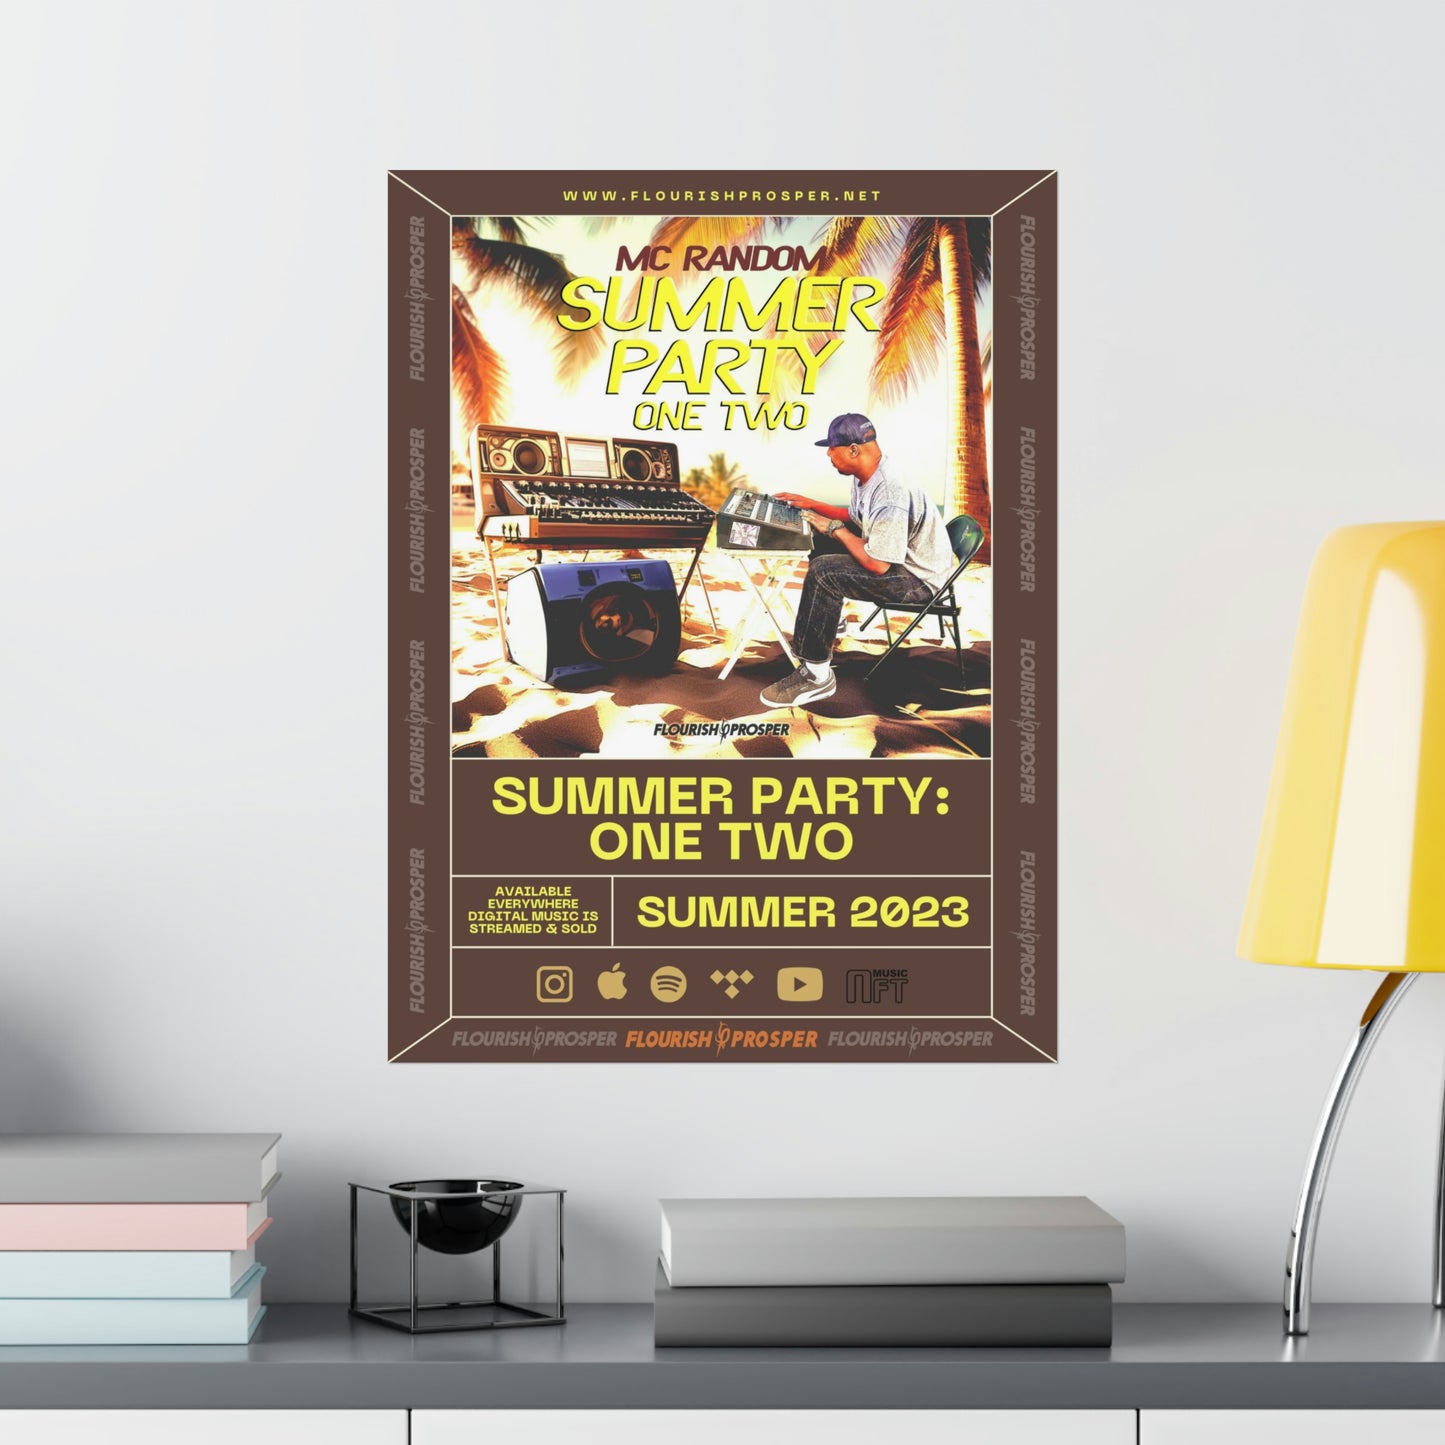 MC Random "Summer Party: One Two" Matte Vertical Posters